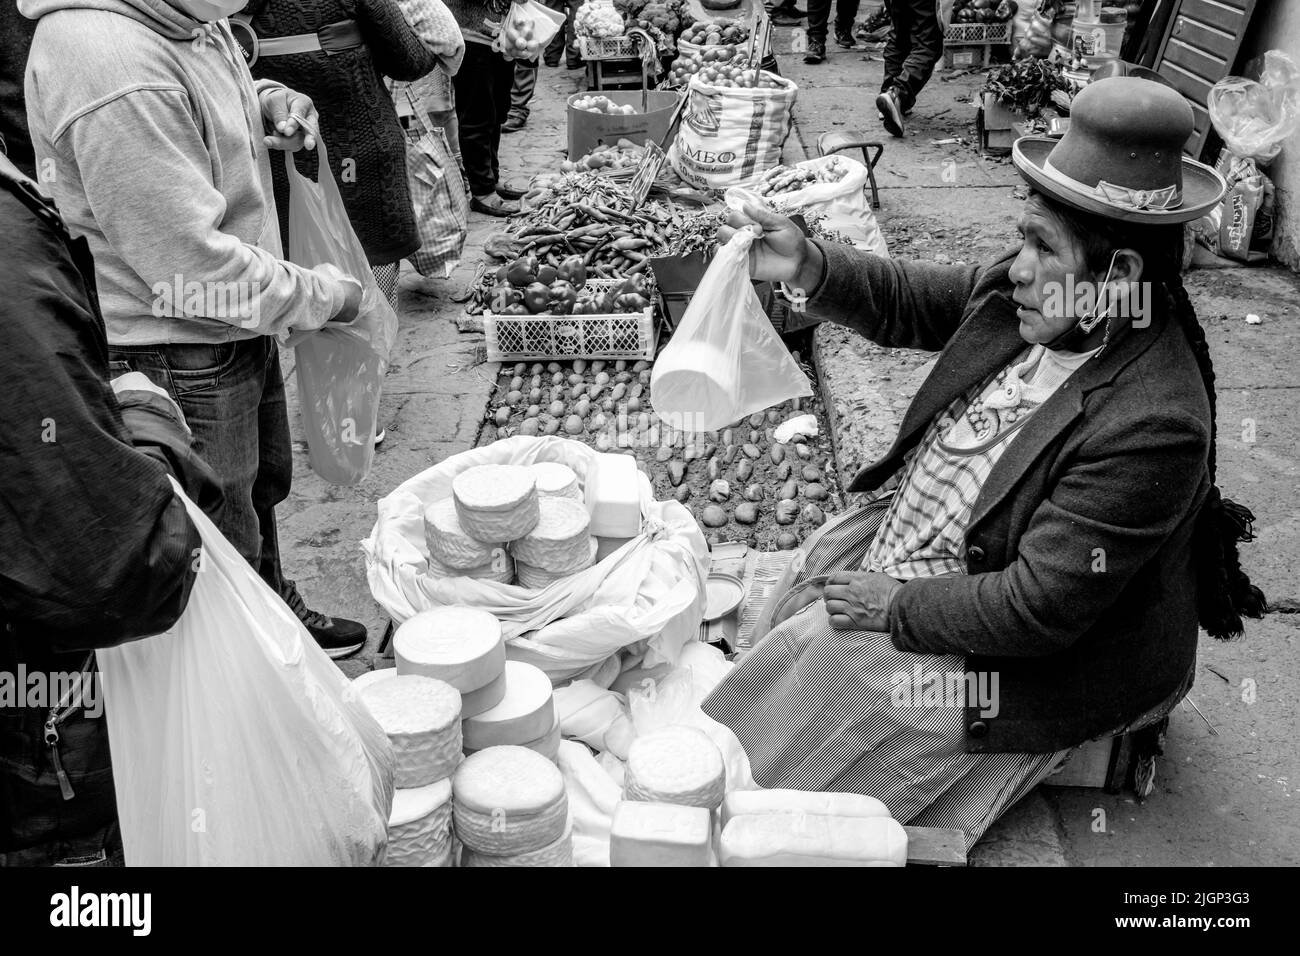 An Indigenous Woman Selling Fresh Cheese At A Street Market In Cusco, Cusco Province, Peru. Stock Photo